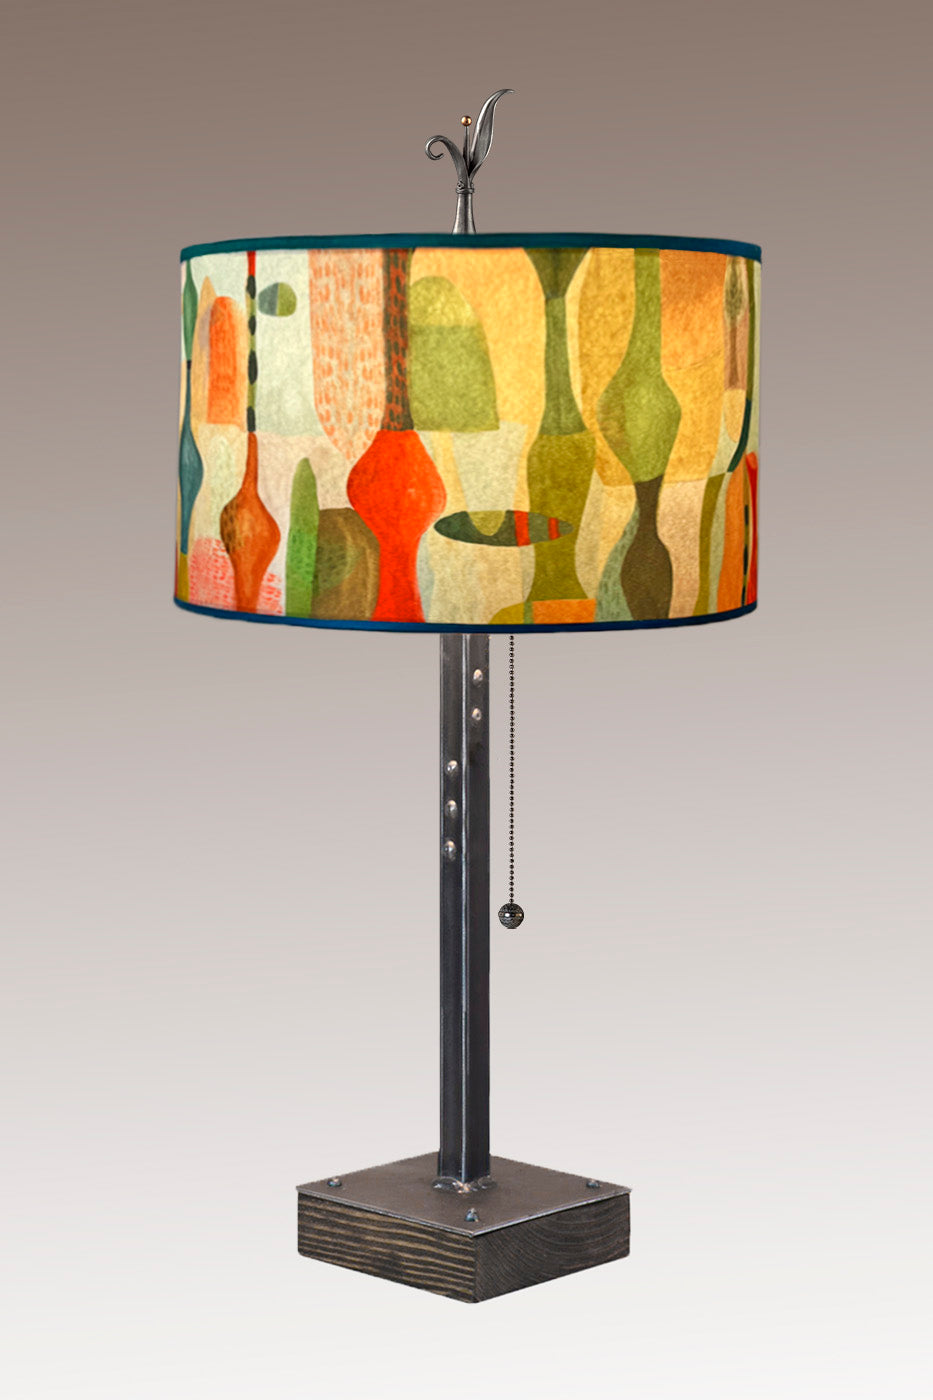 Steel Table Lamp on Wood with Large Drum Shade in Riviera in Poppy